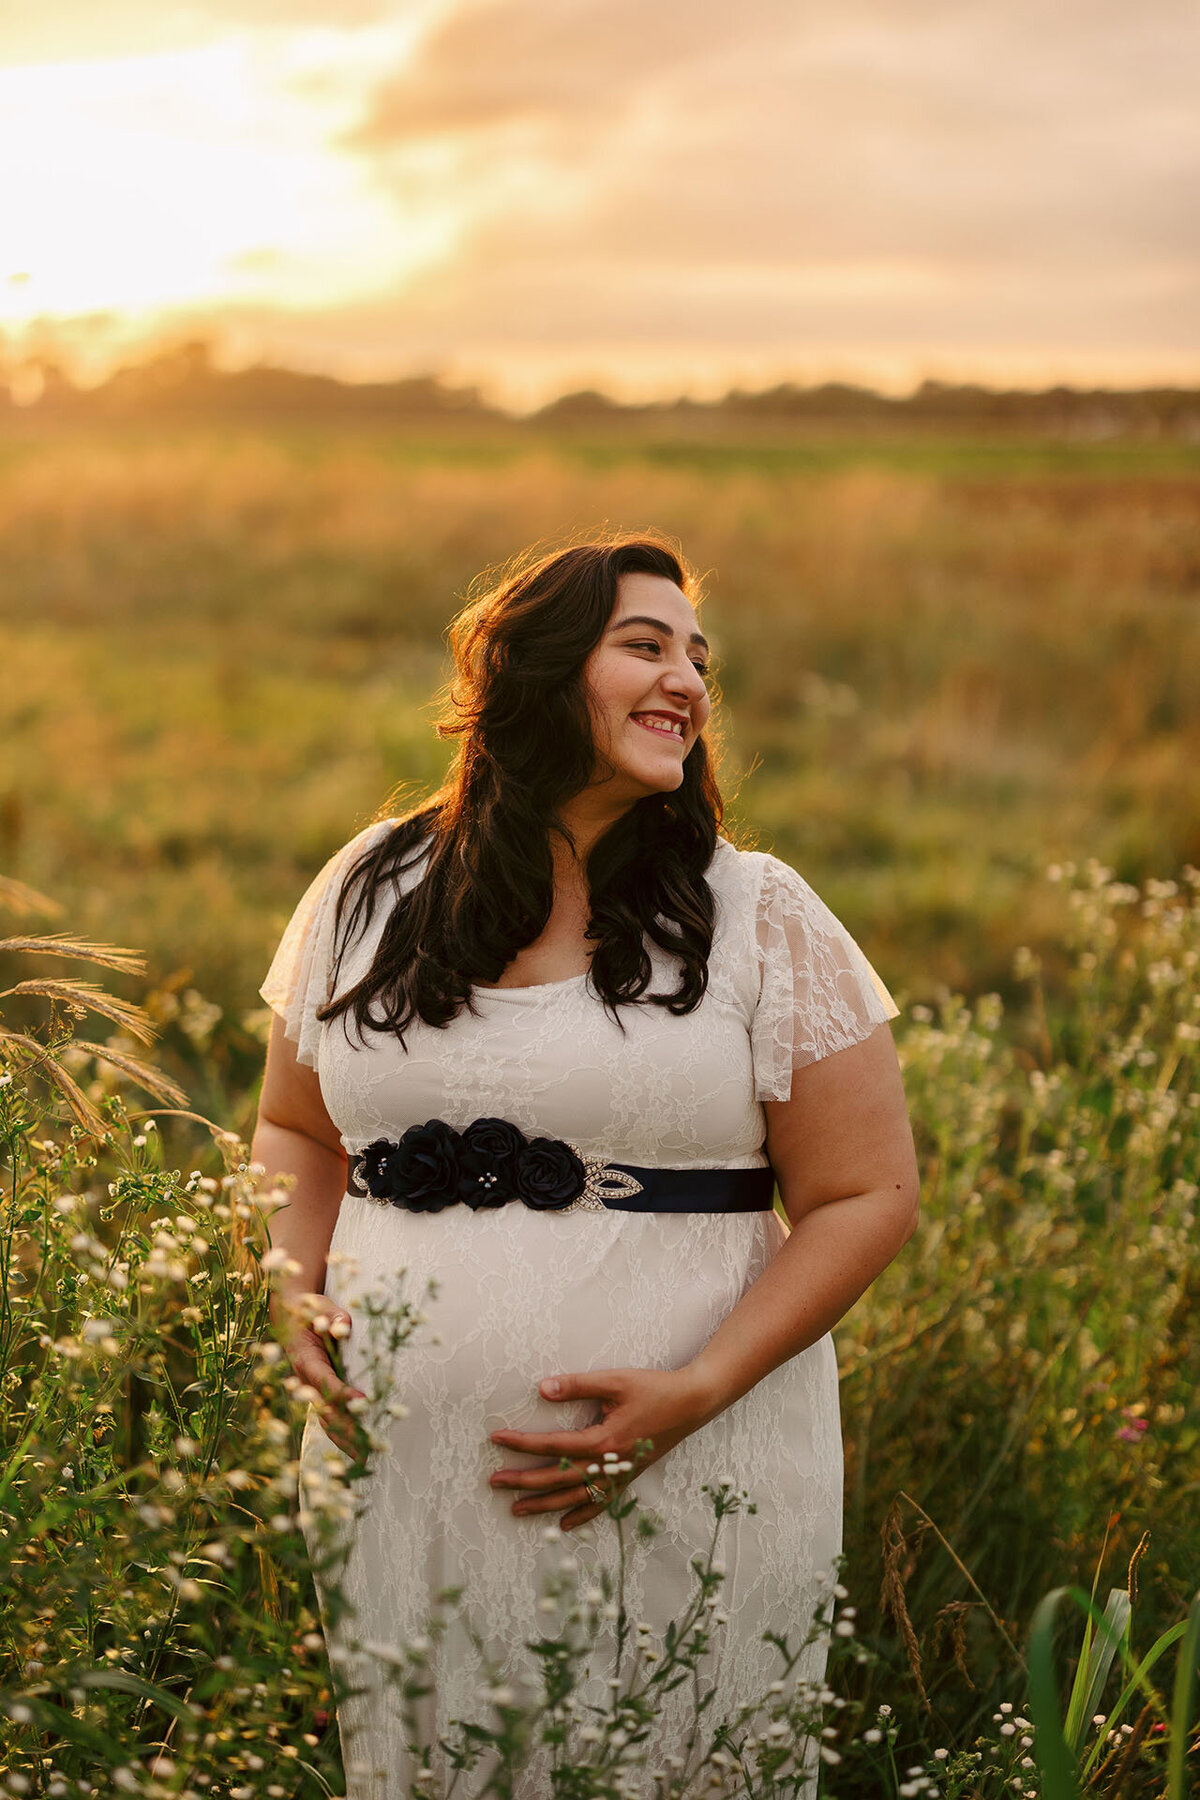 memphis maternity photography by jen howell 17